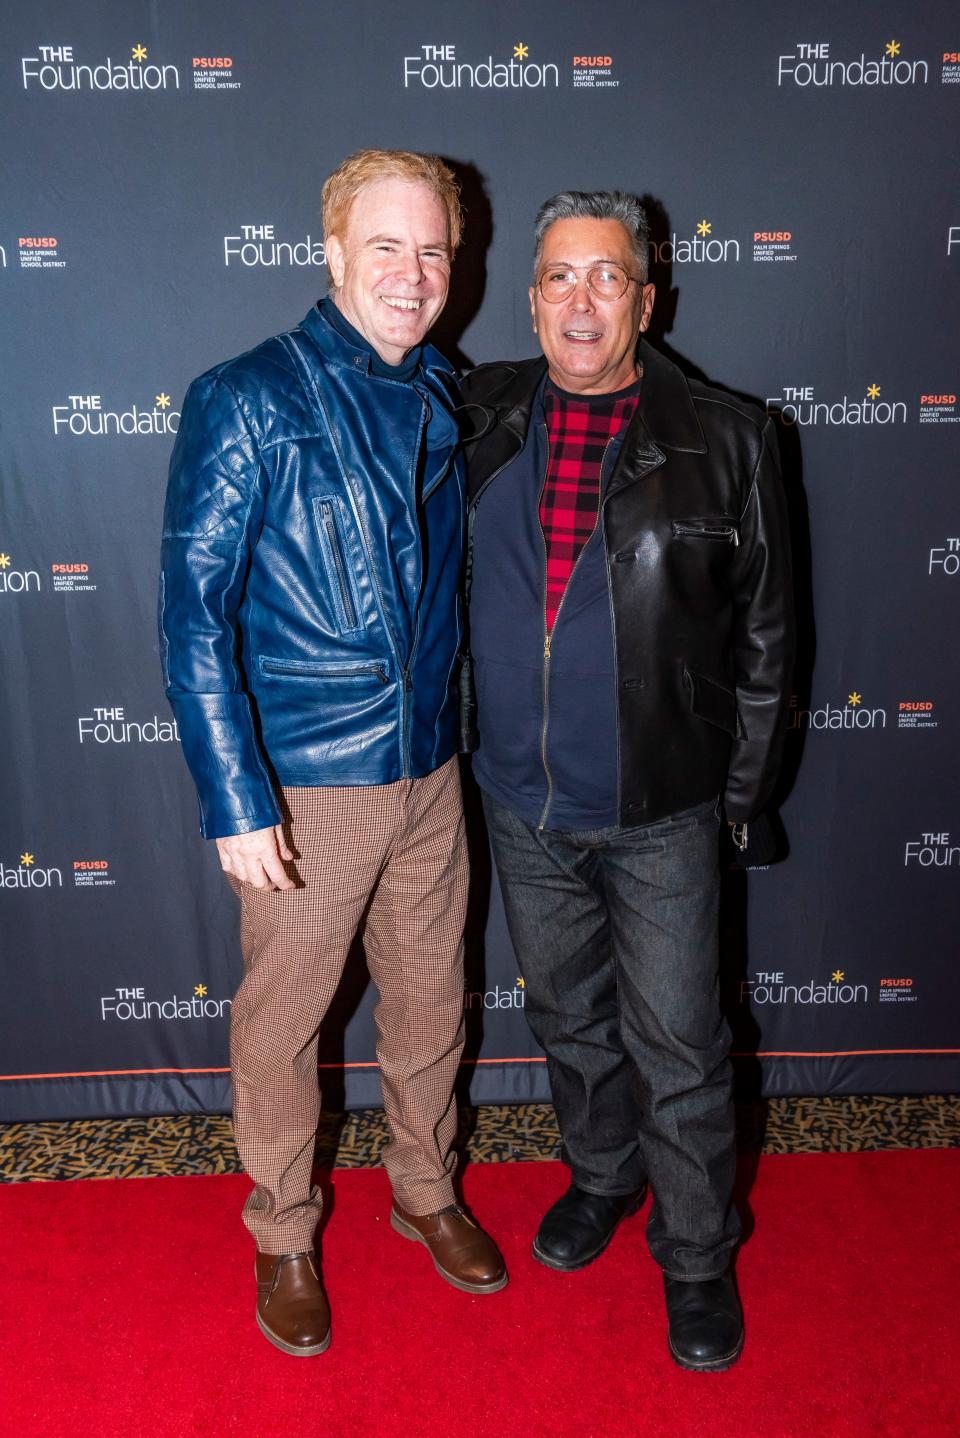 MTU founder David Green poses on the red carpet with Dimitri Halkidis at the premiere of "Blame It on the Mistletoe" at the Camelot Theatre on Dec. 16, 2021.